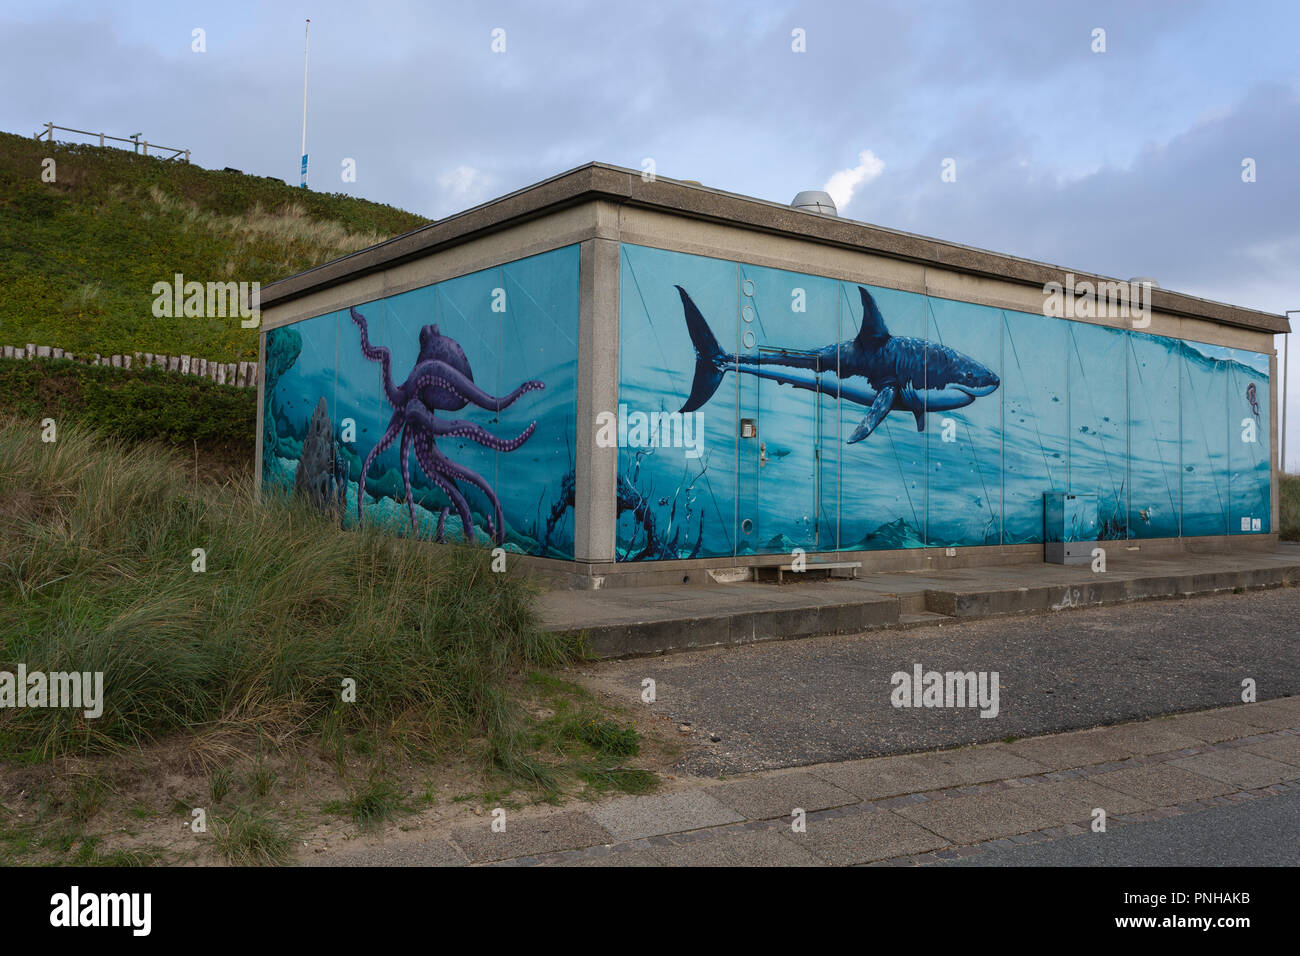 Street Art artists have decorated buildings and walls with grafitti art in Hvide Sande, Denmark. Street Art Künstler haben in Hvide Sande, Dänemark, G Stock Photo